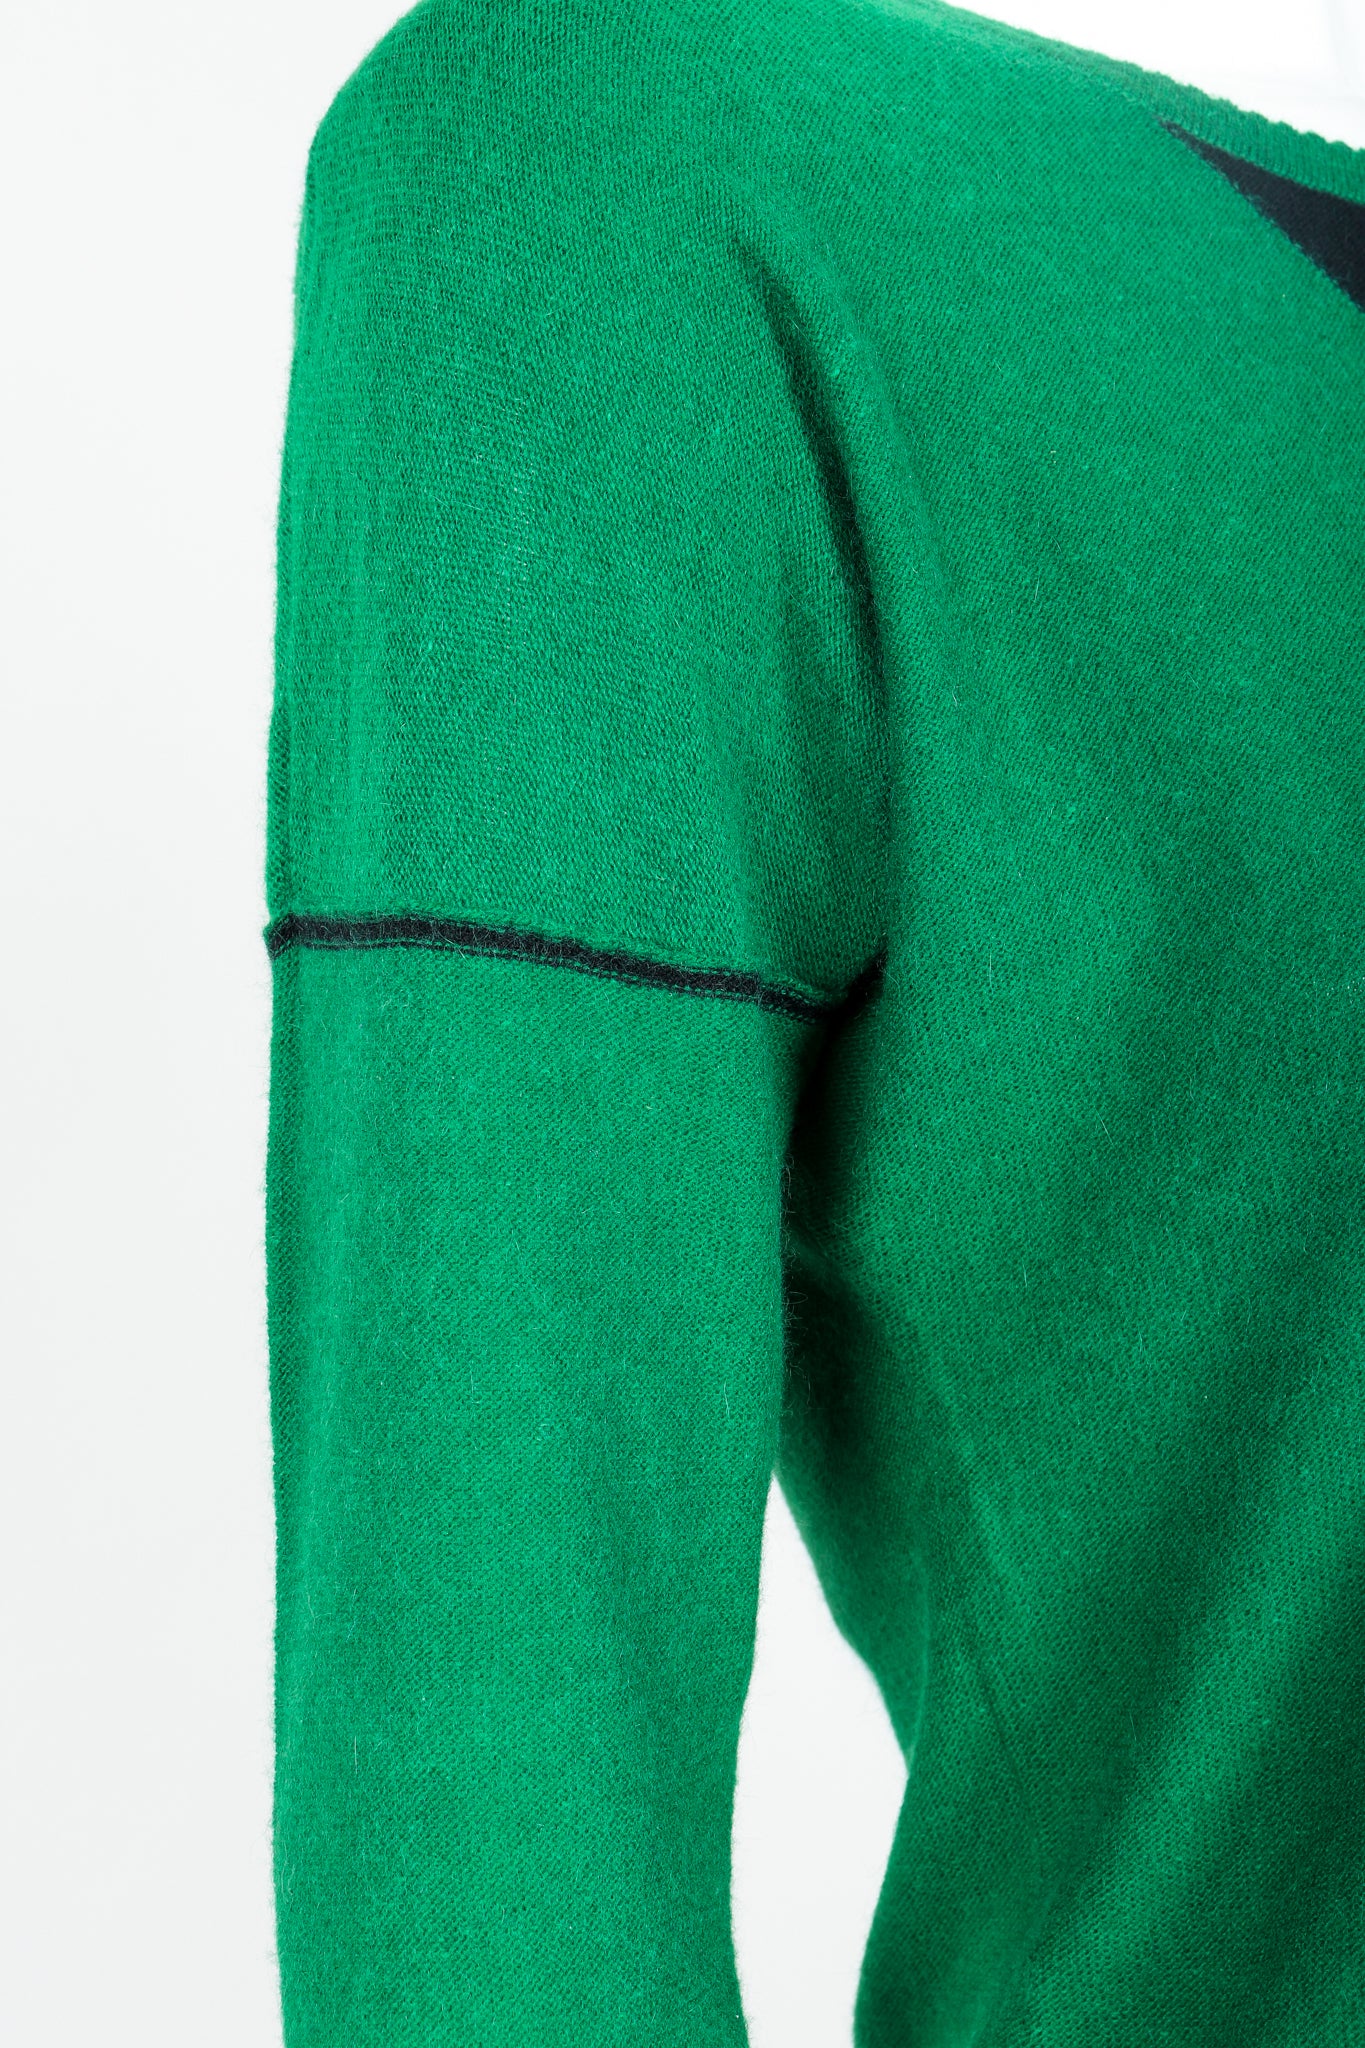 Vintage Sonia Rykiel Green Knit Triangle Yoke Sweater on Mannequin Dropped Shoulder at Recess